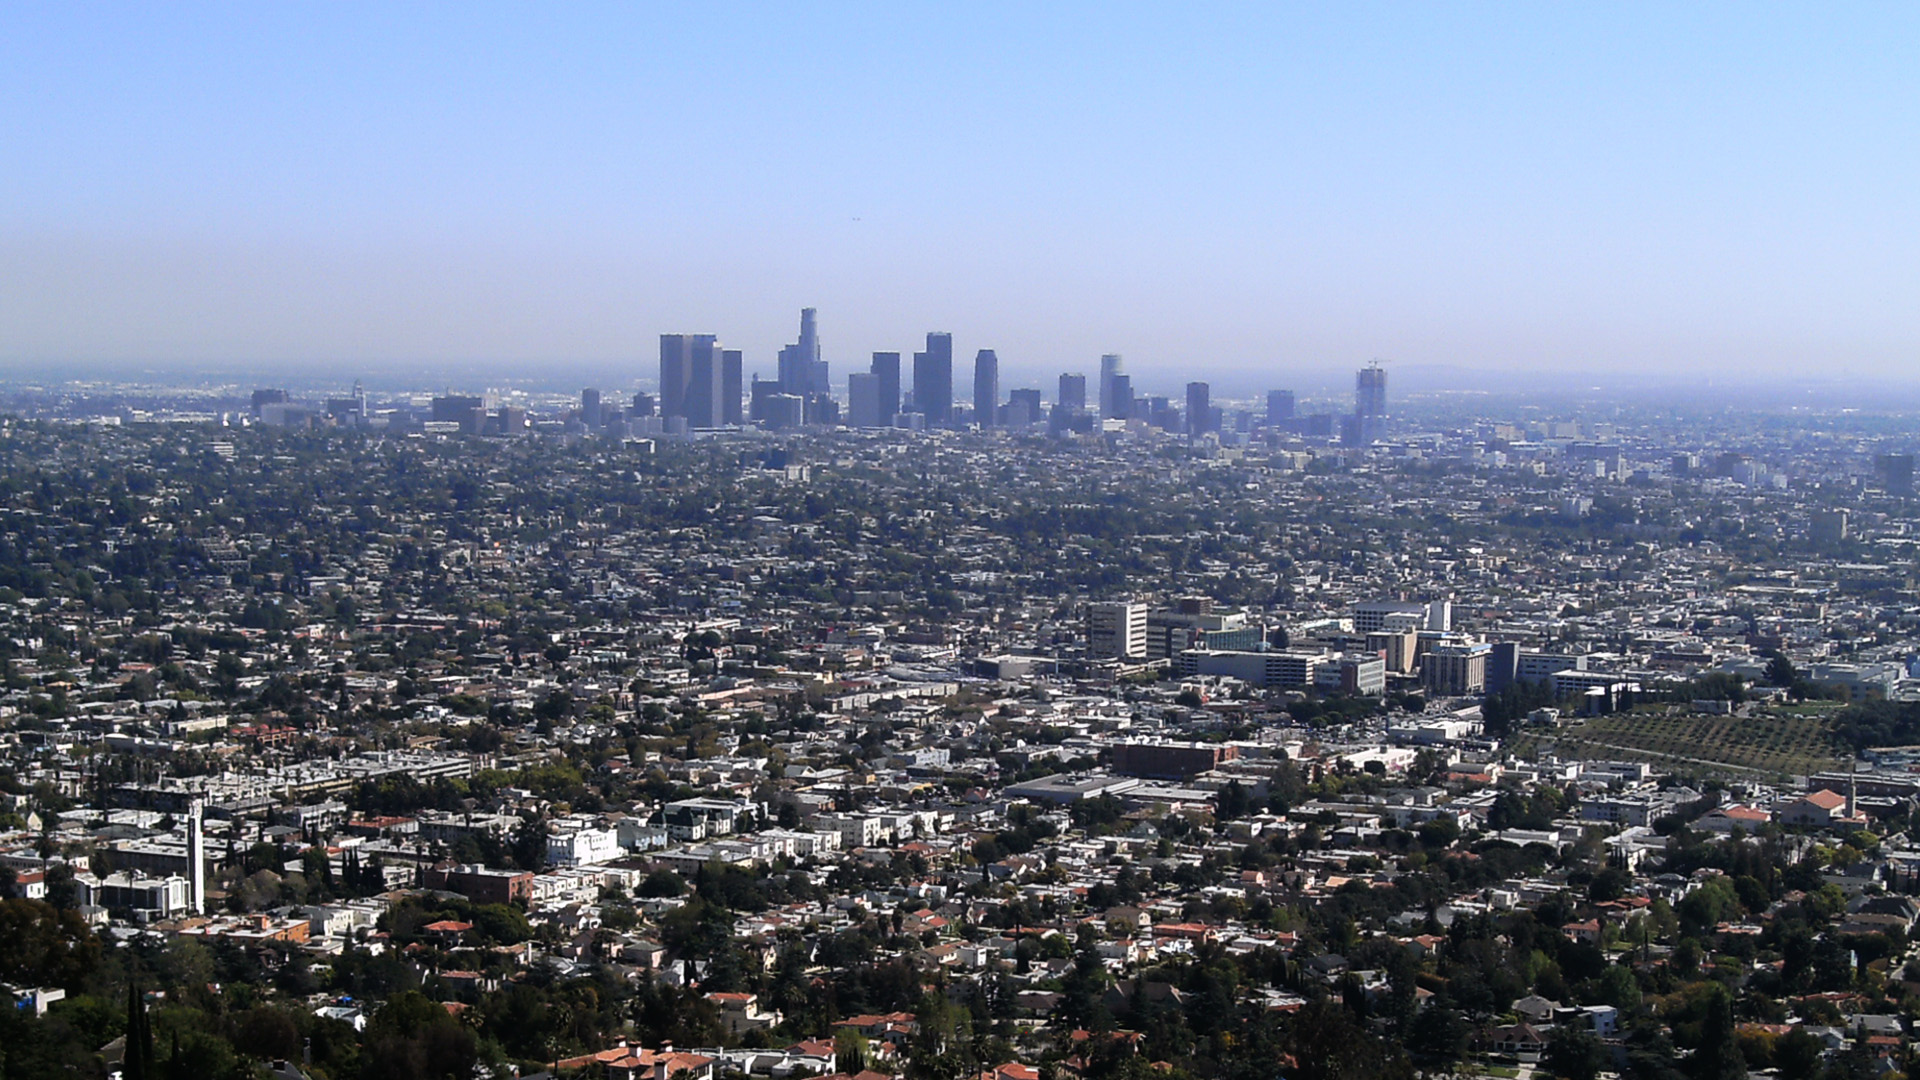 Enjoy this Los Angeles background Cities wallpapers